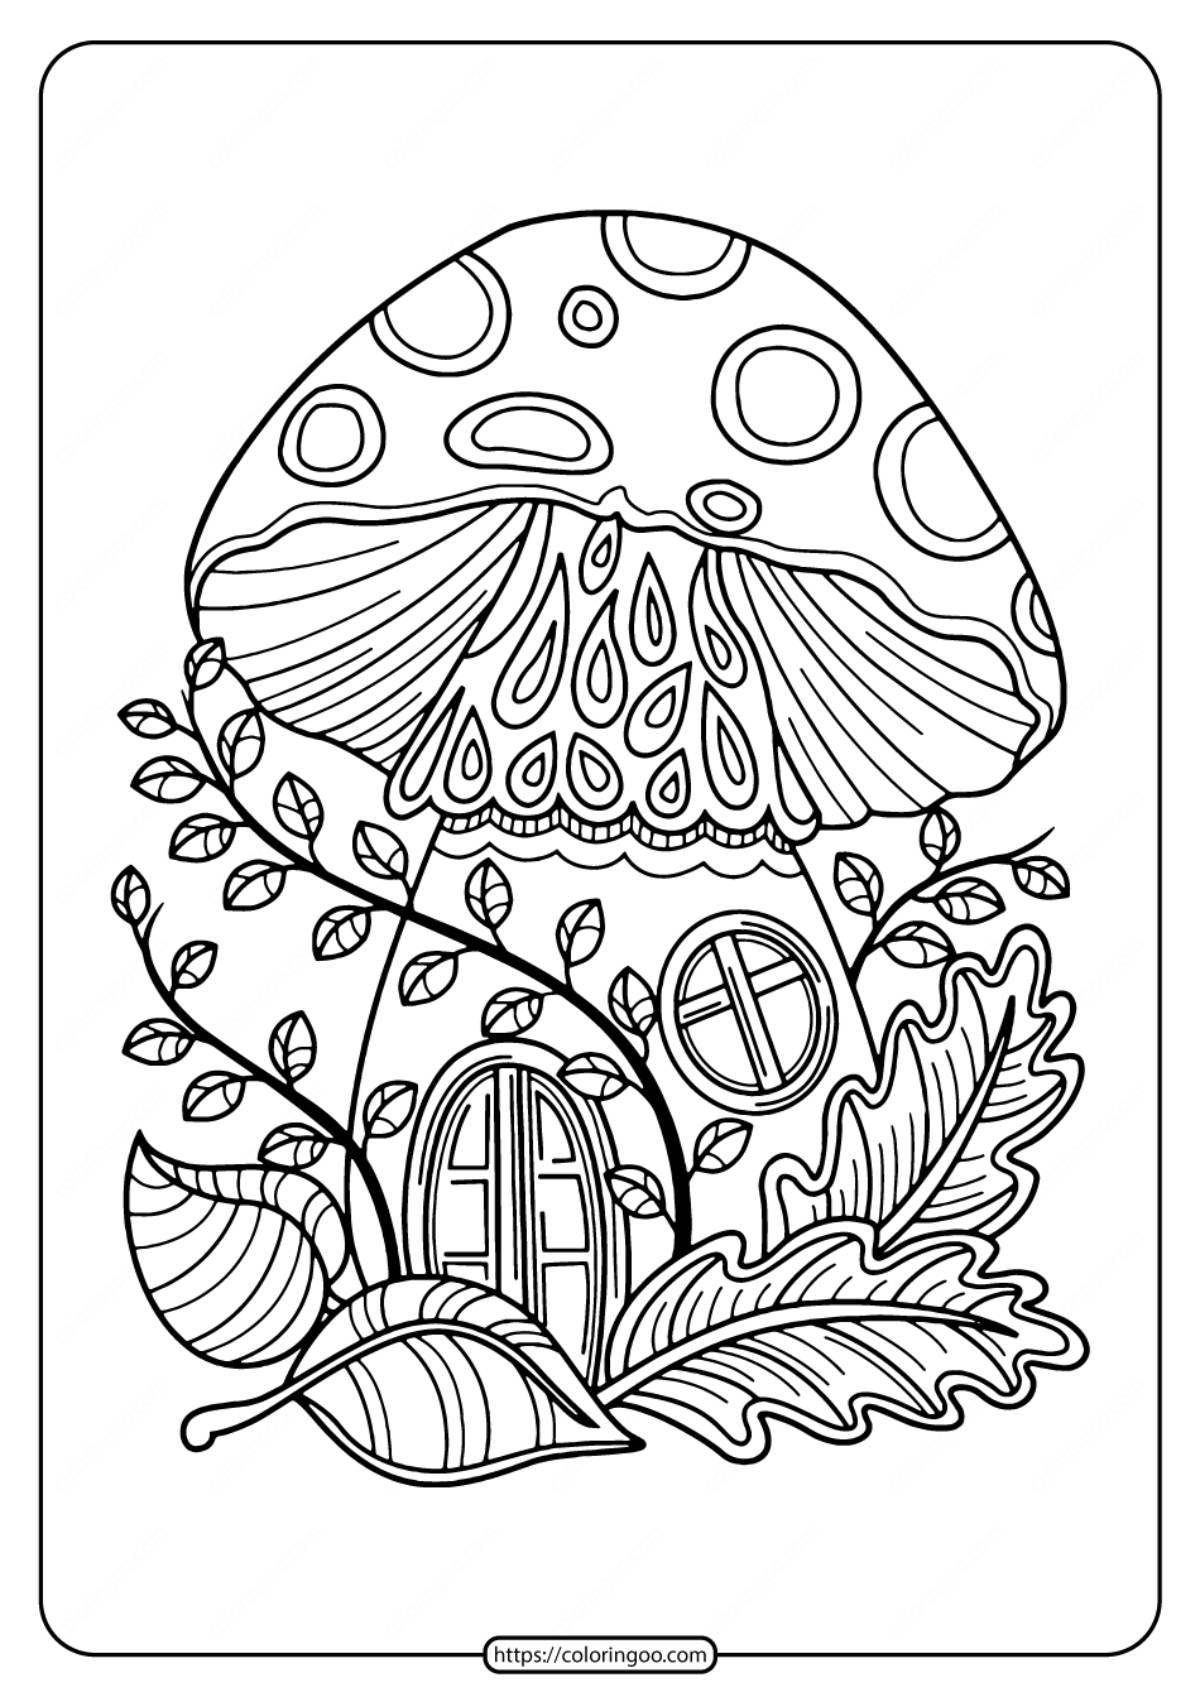 Incredible awesome coloring book